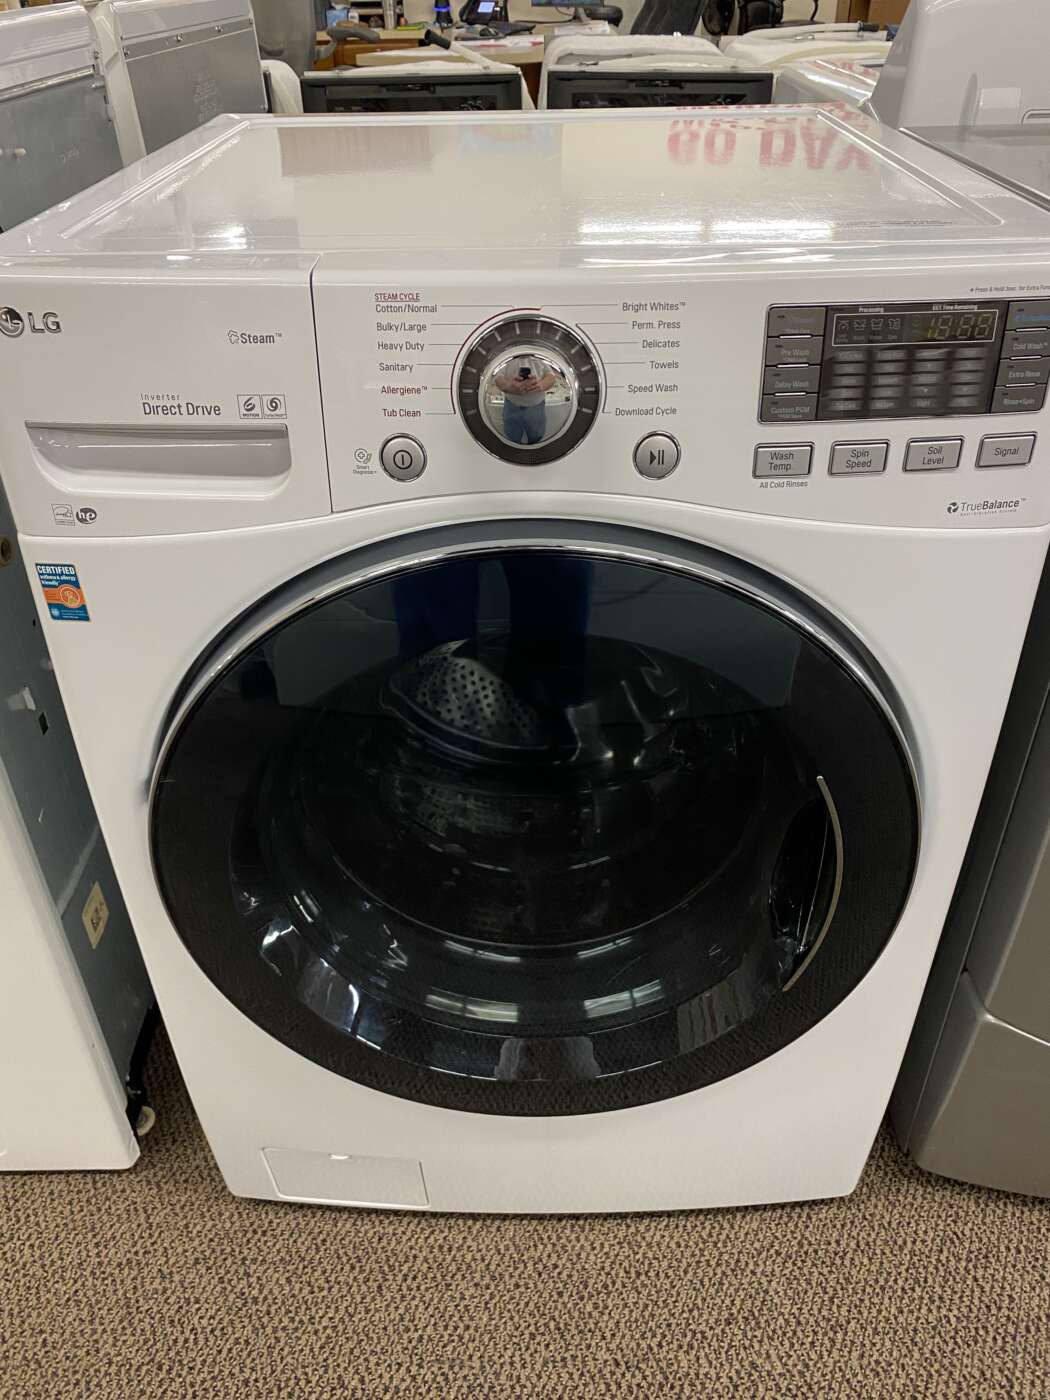 Reconditioned L/G 4.3 Cu. Ft. Front-Load H/E Washer – White